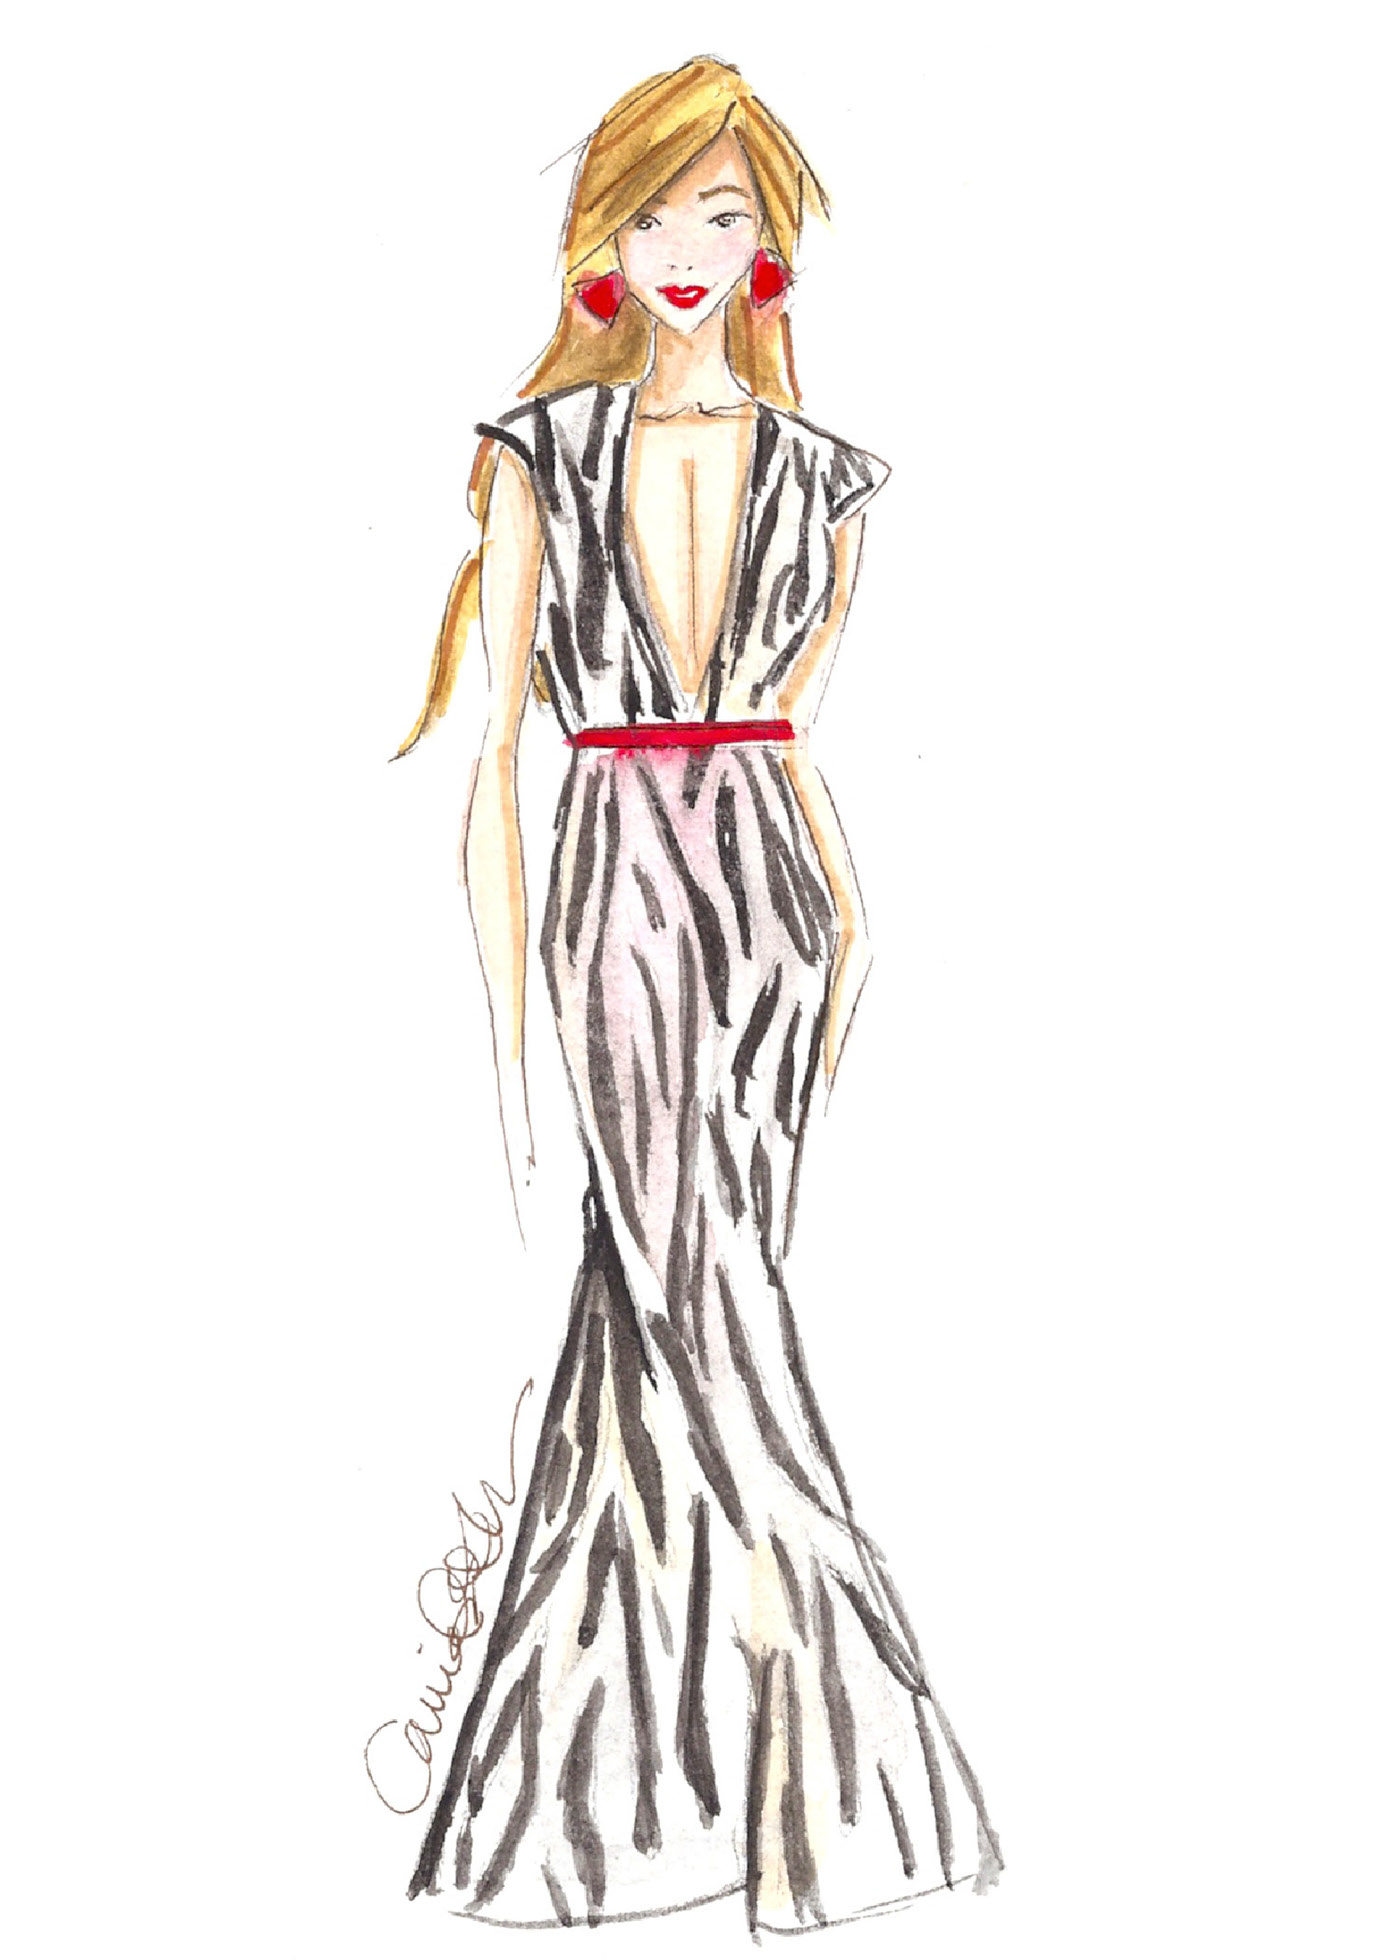 Carrie Beth Taylor - Fashion Illustration on Behance